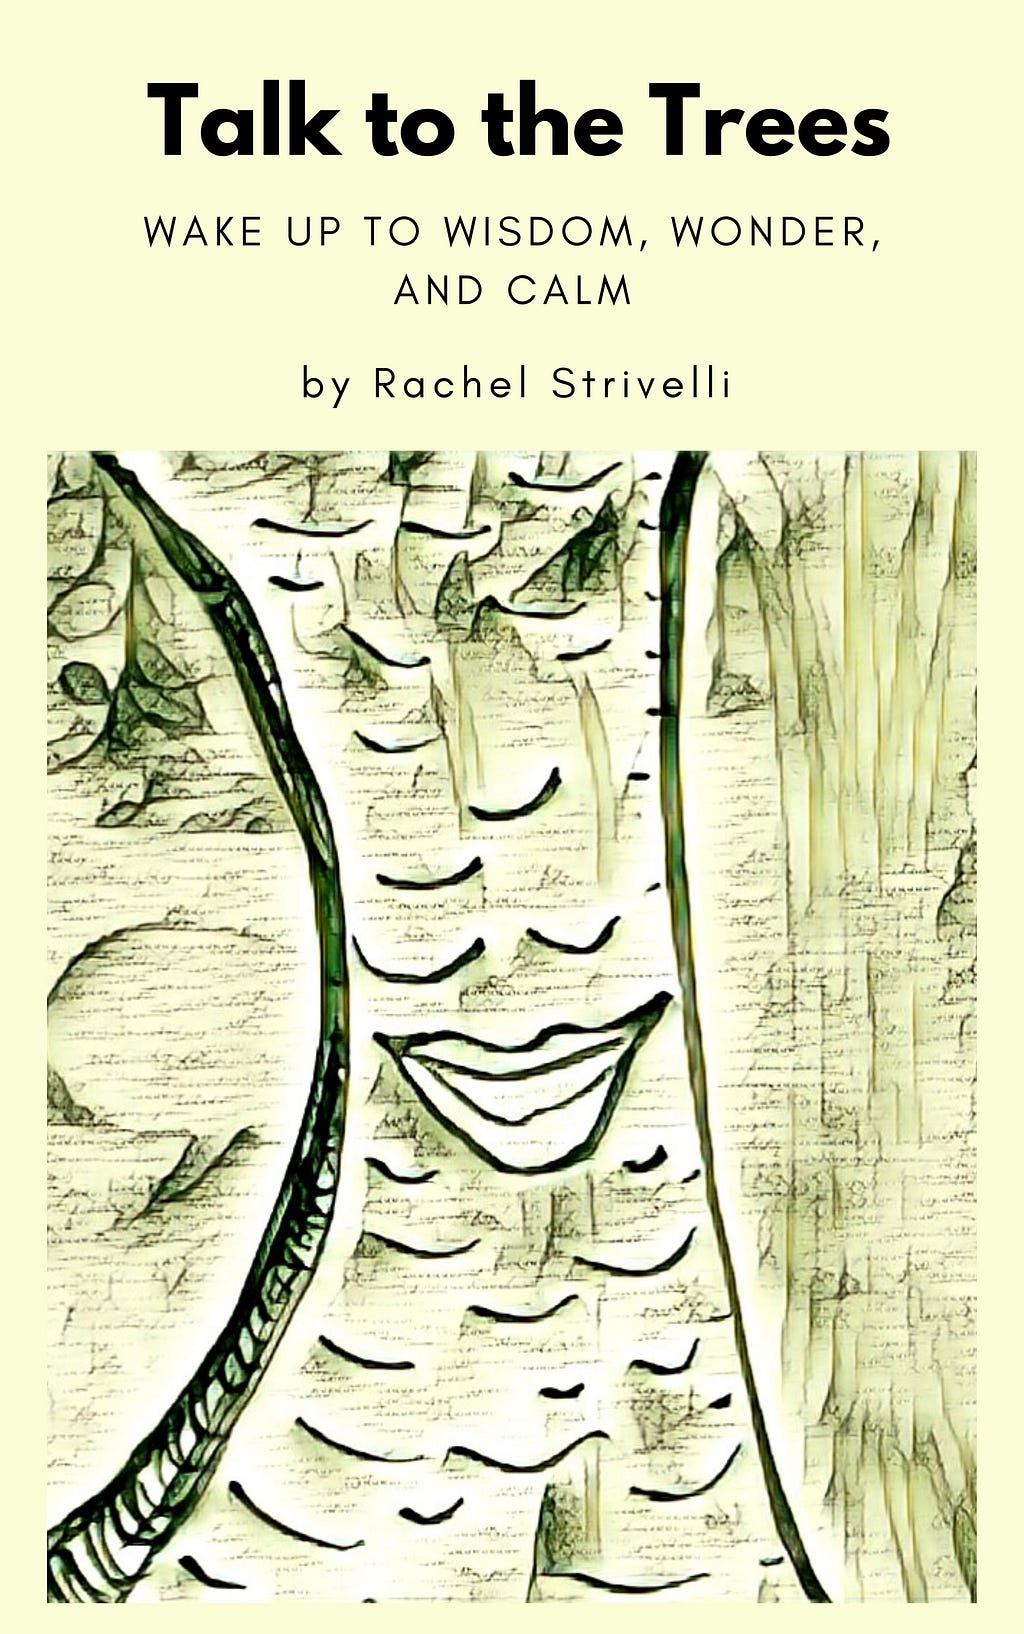 A book cover of a basic sketch of a tree trunk with a smile and the title: Talk to the Trees; wake up to wisdom, wonder, and calm.